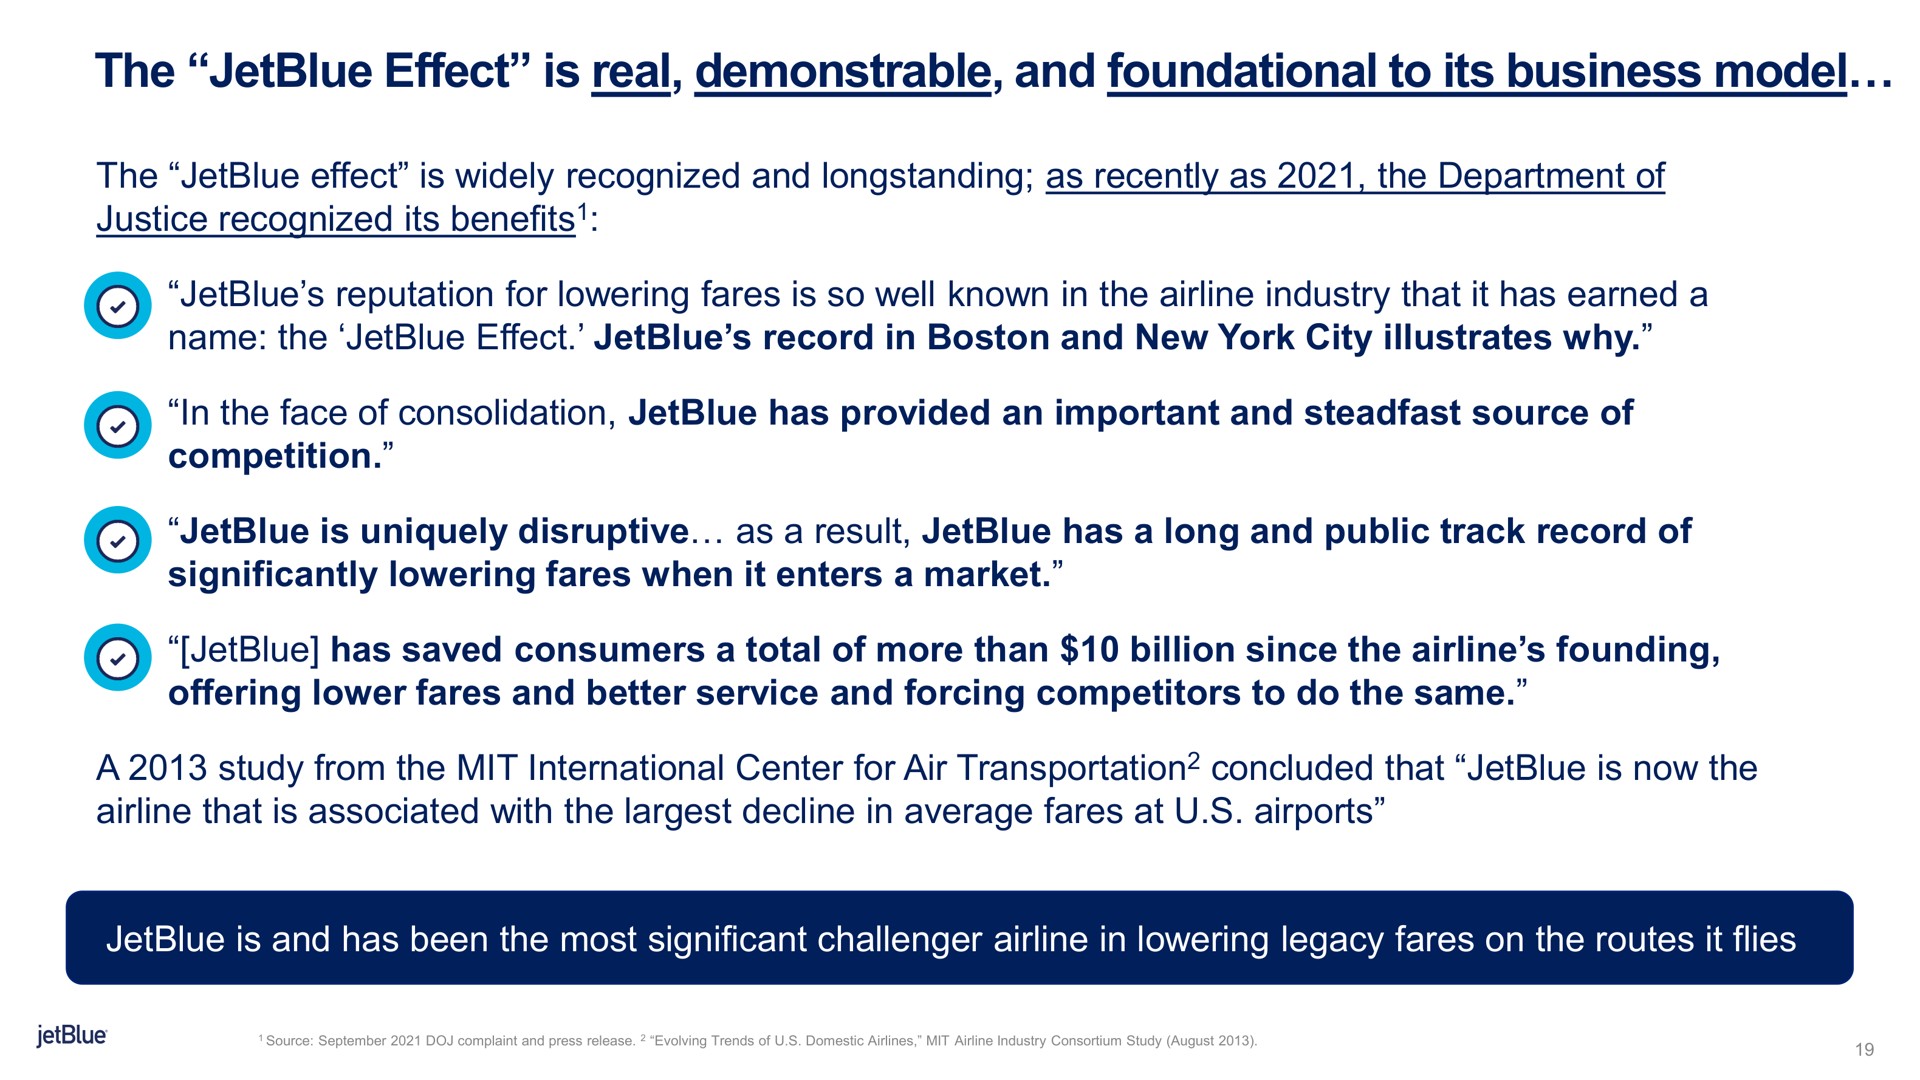 the effect is real demonstrable and foundational to its business model | jetBlue